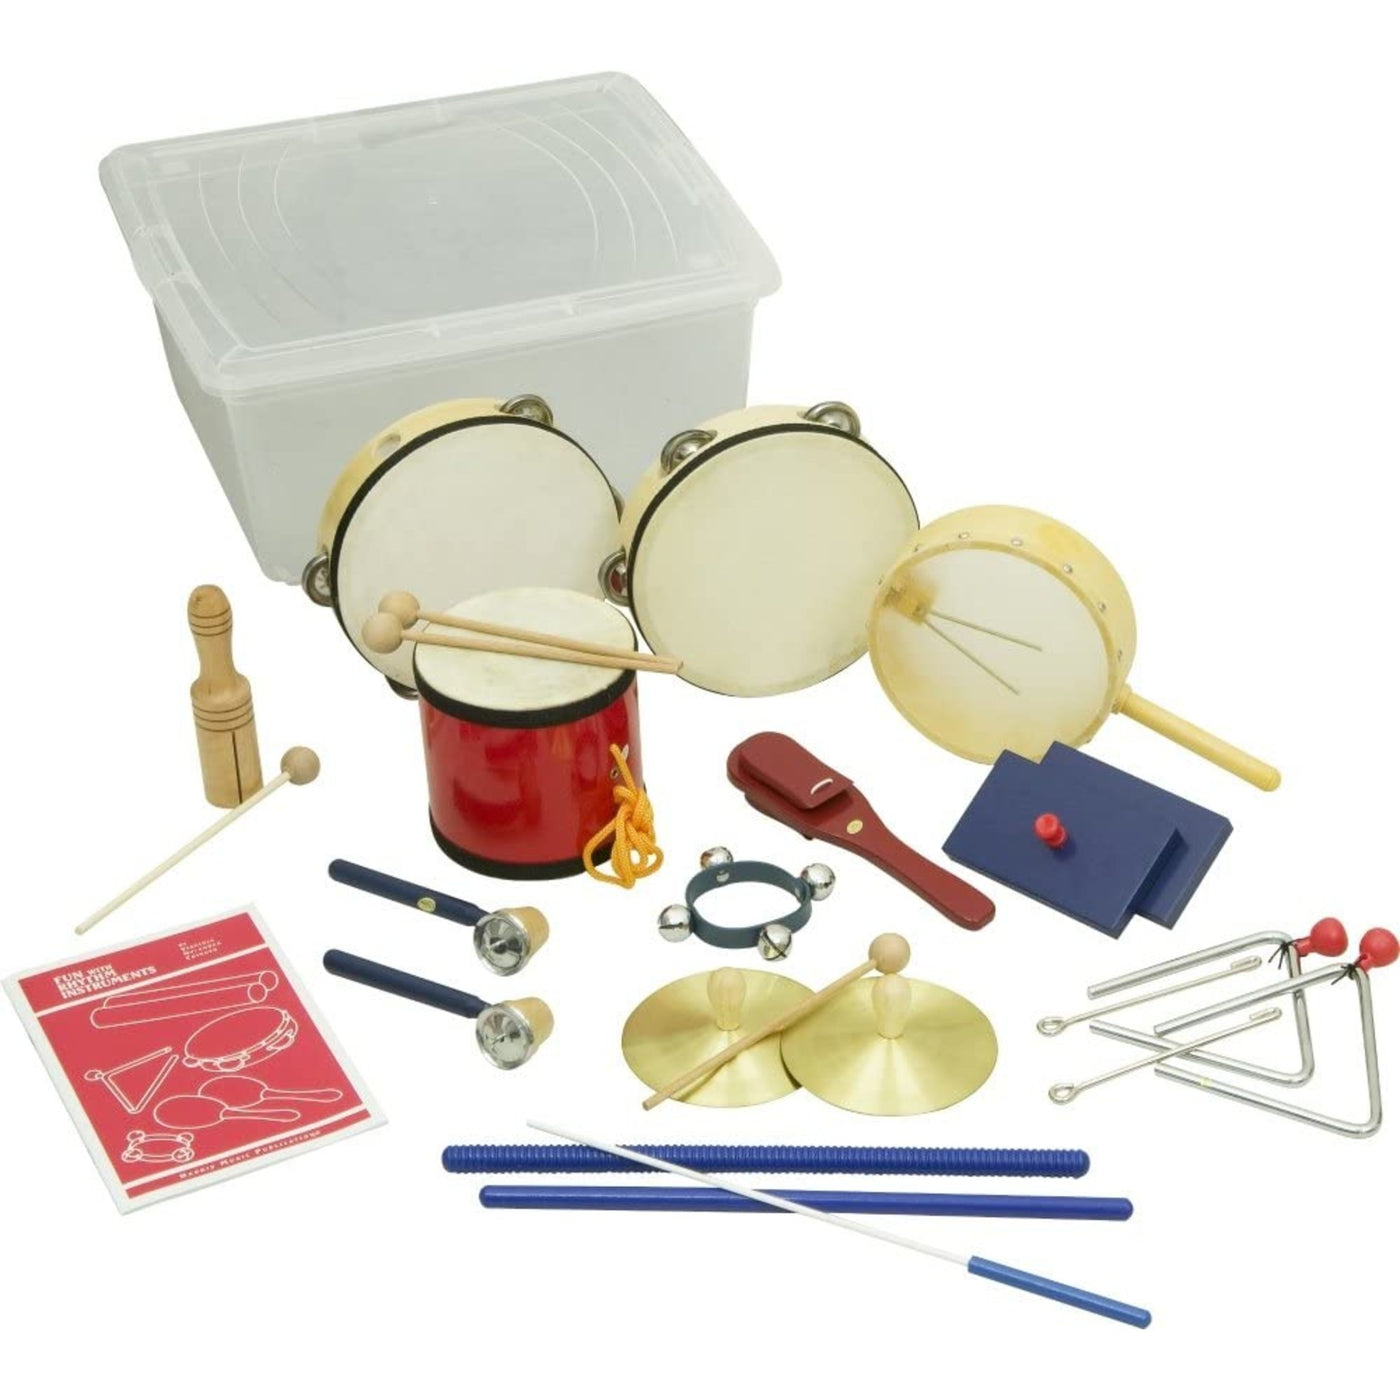 Rhythm Band Deluxe Rhythm Set with 15 Instruments and Storage Case (RB45)